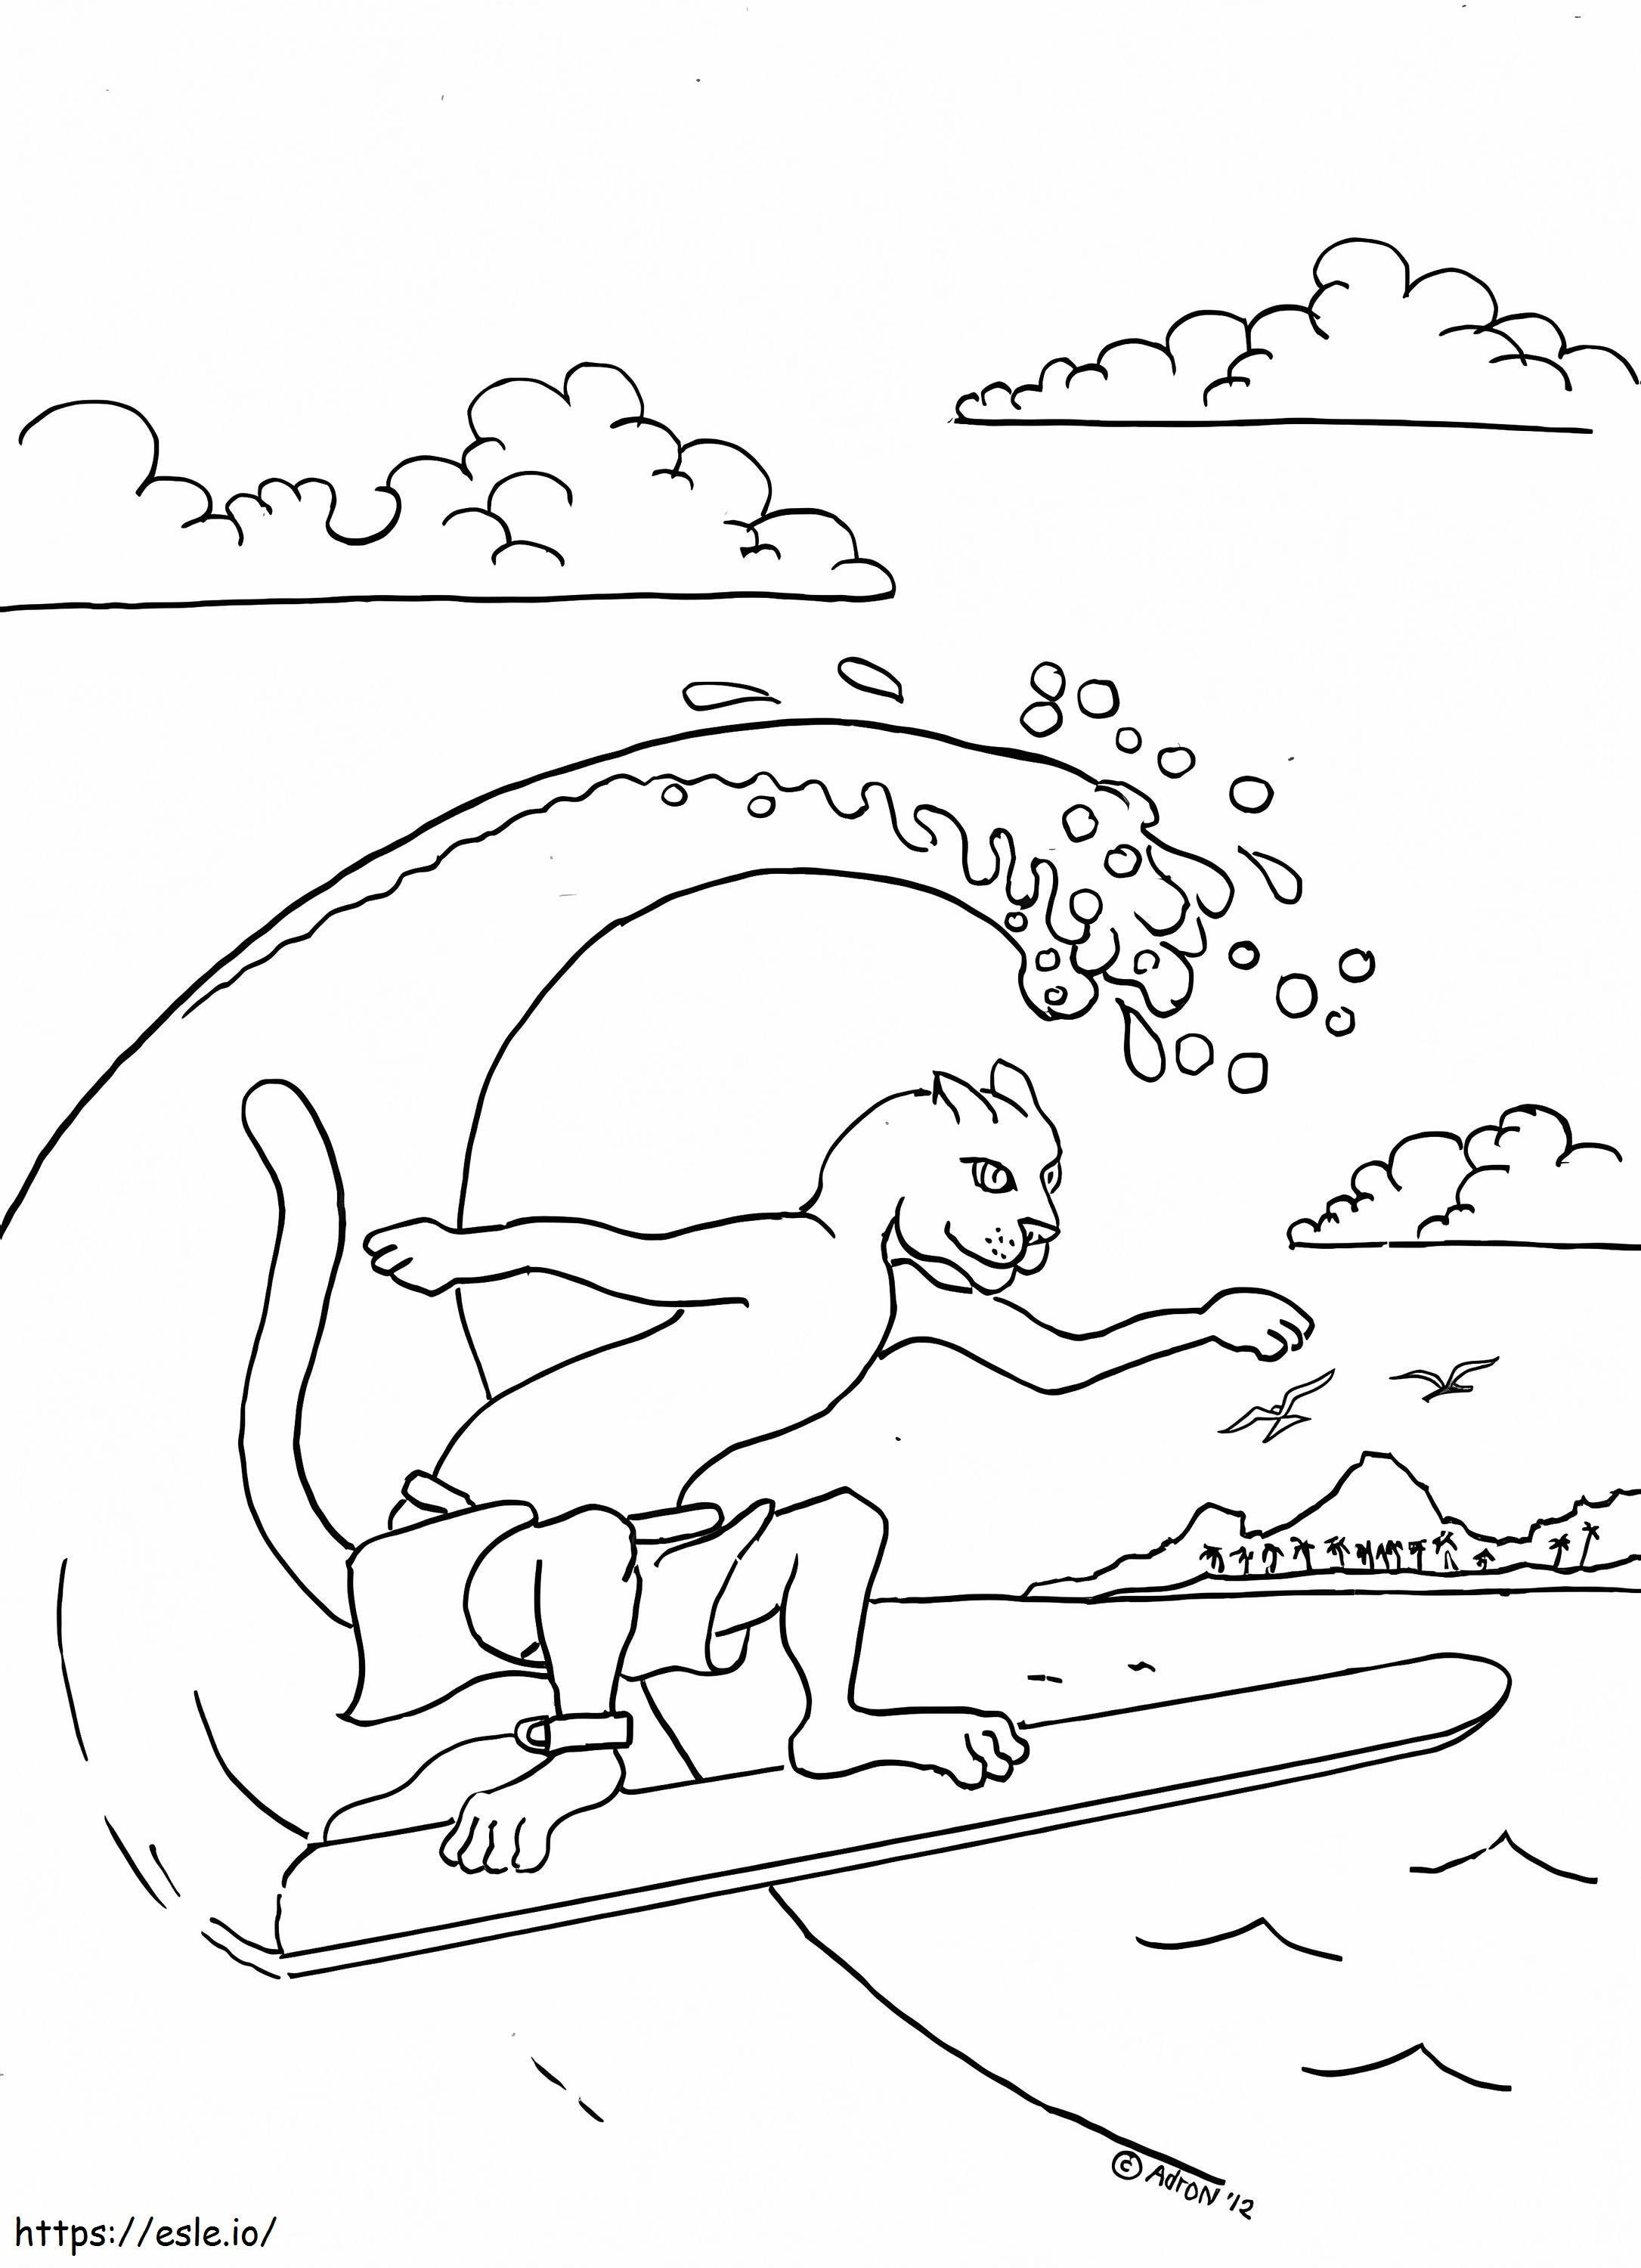 Cougar Surfing coloring page